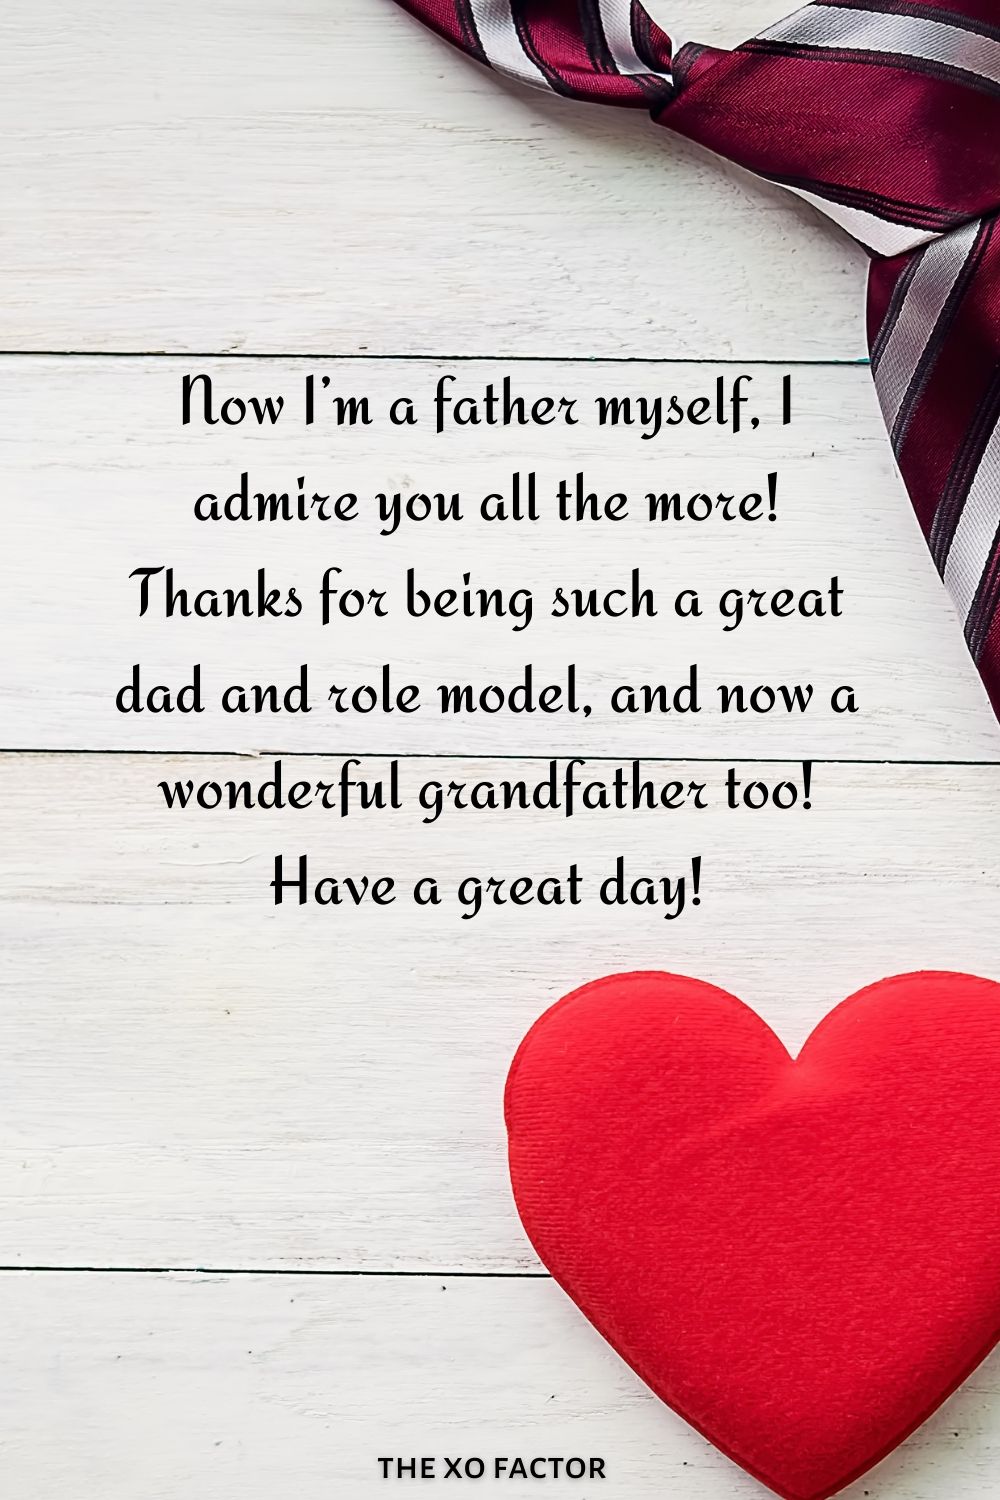 Now I’m a father myself, I admire you all the more! Thanks for being such a great dad and role model, and now a wonderful grandfather too! Have a great day!